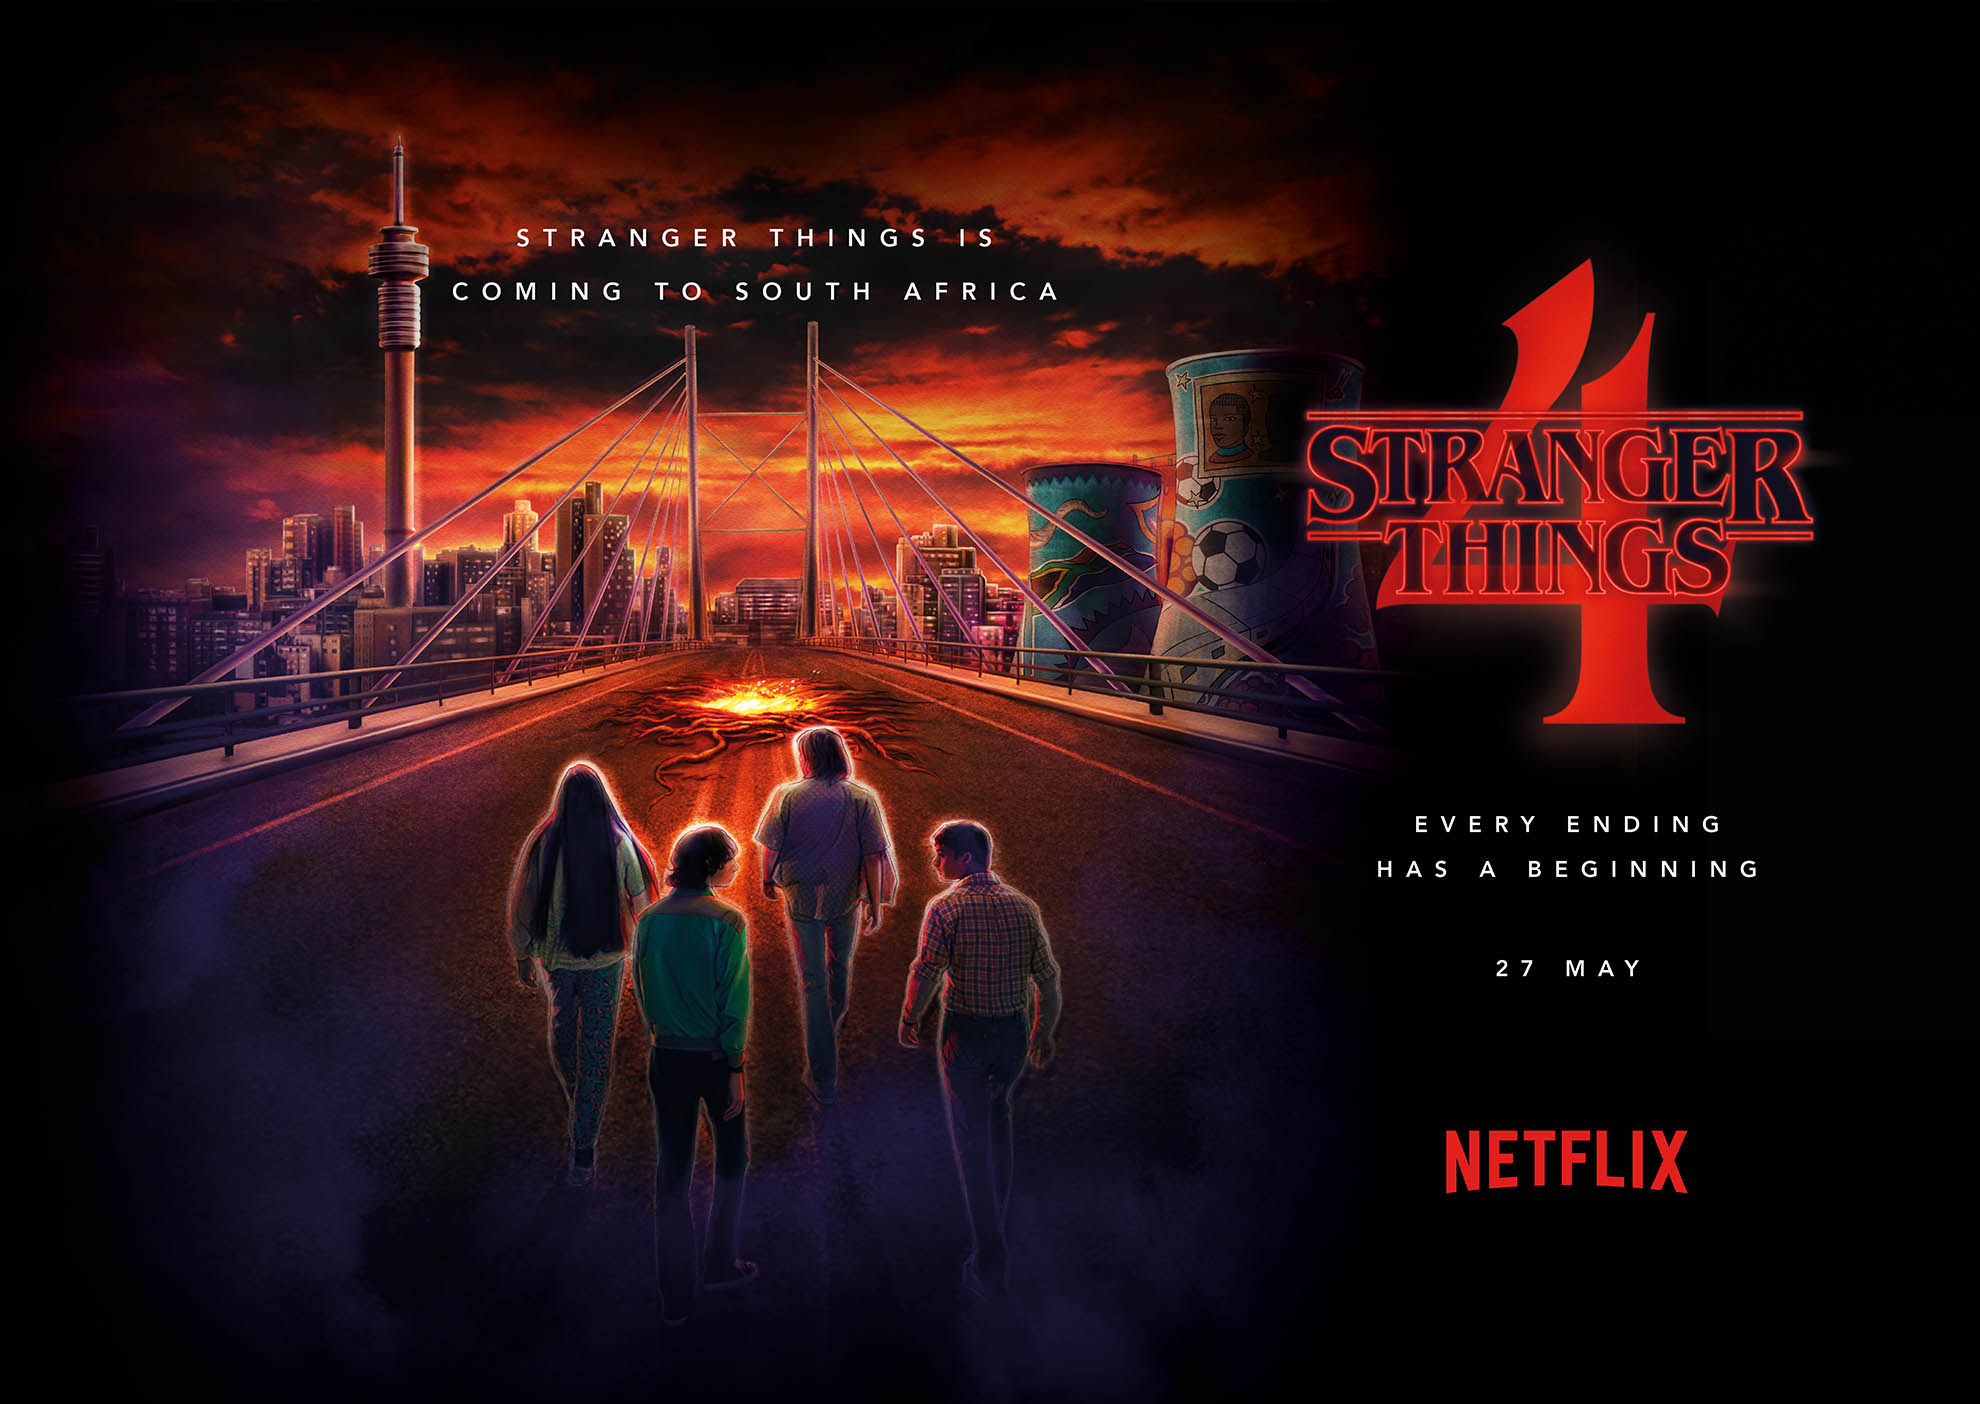 Netflix ‘Stranger Things coming to South Africa’